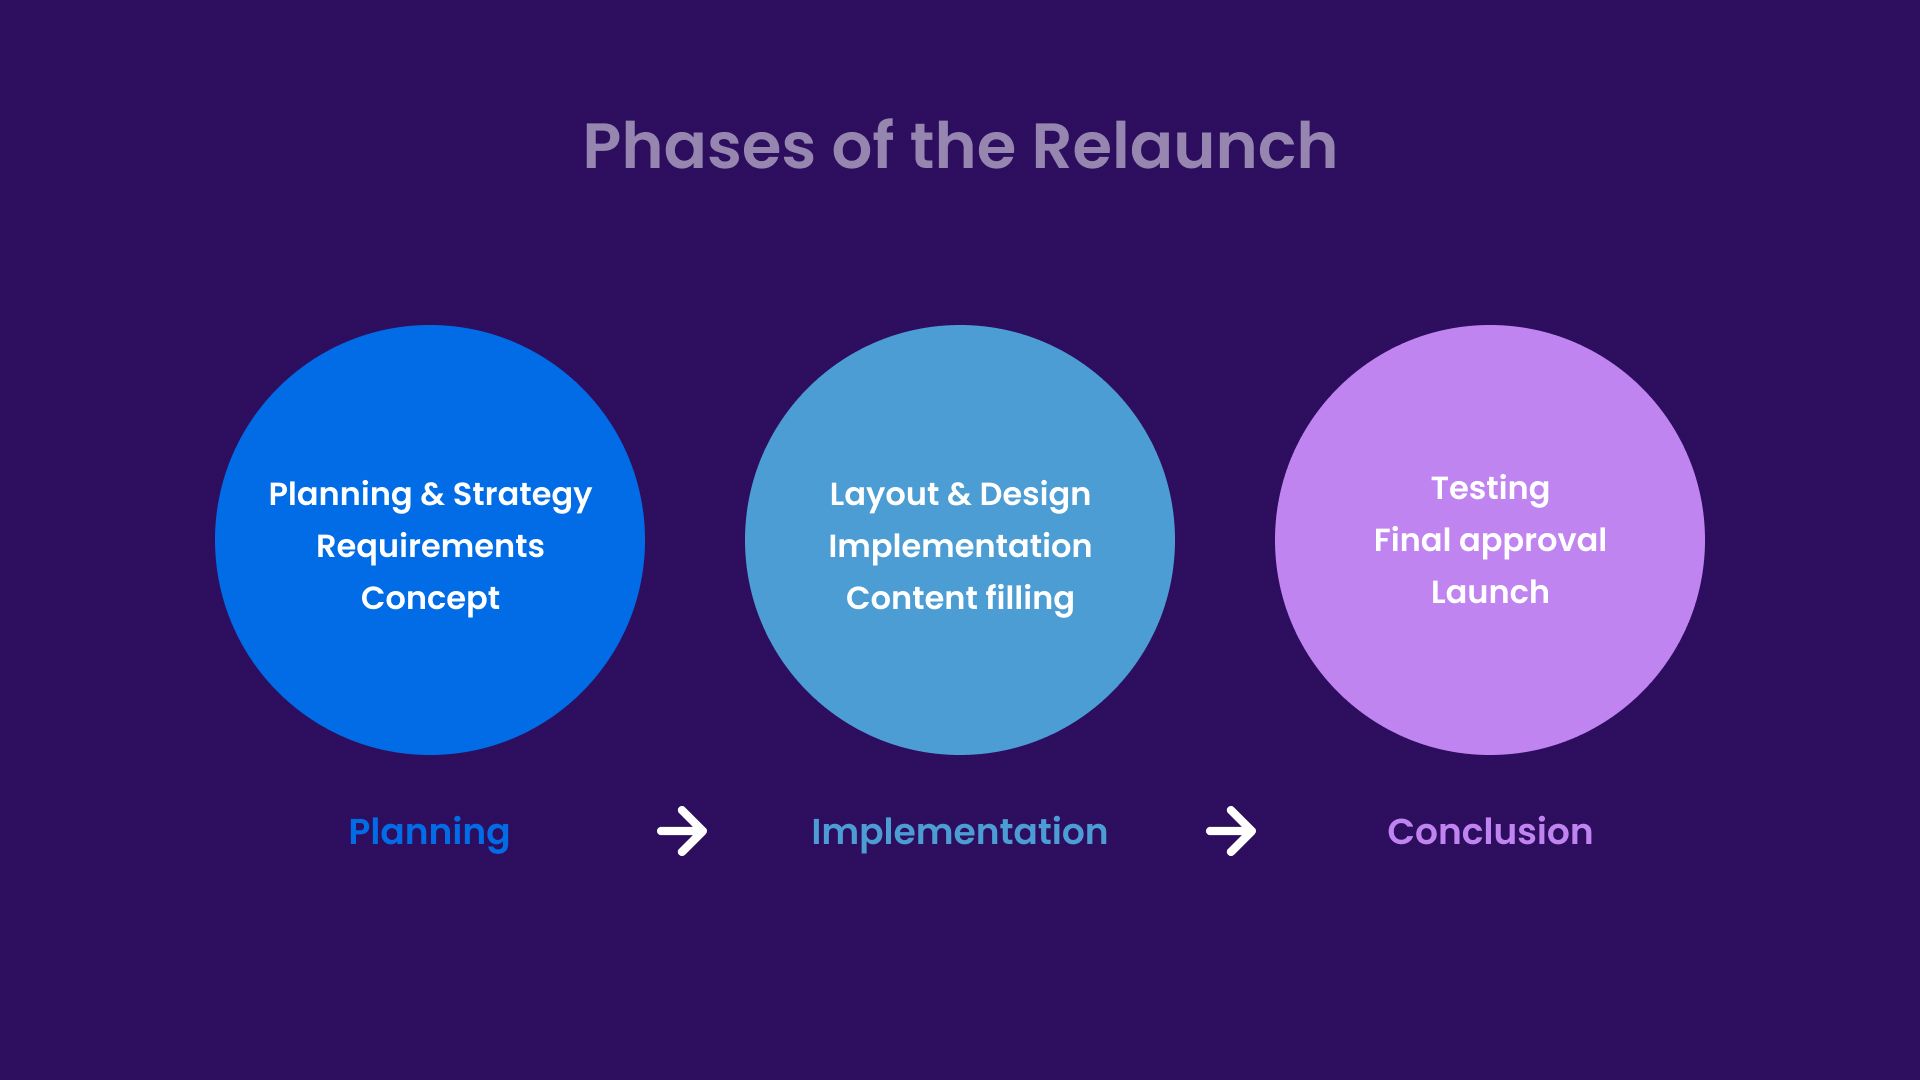 Phases of the Relaunch